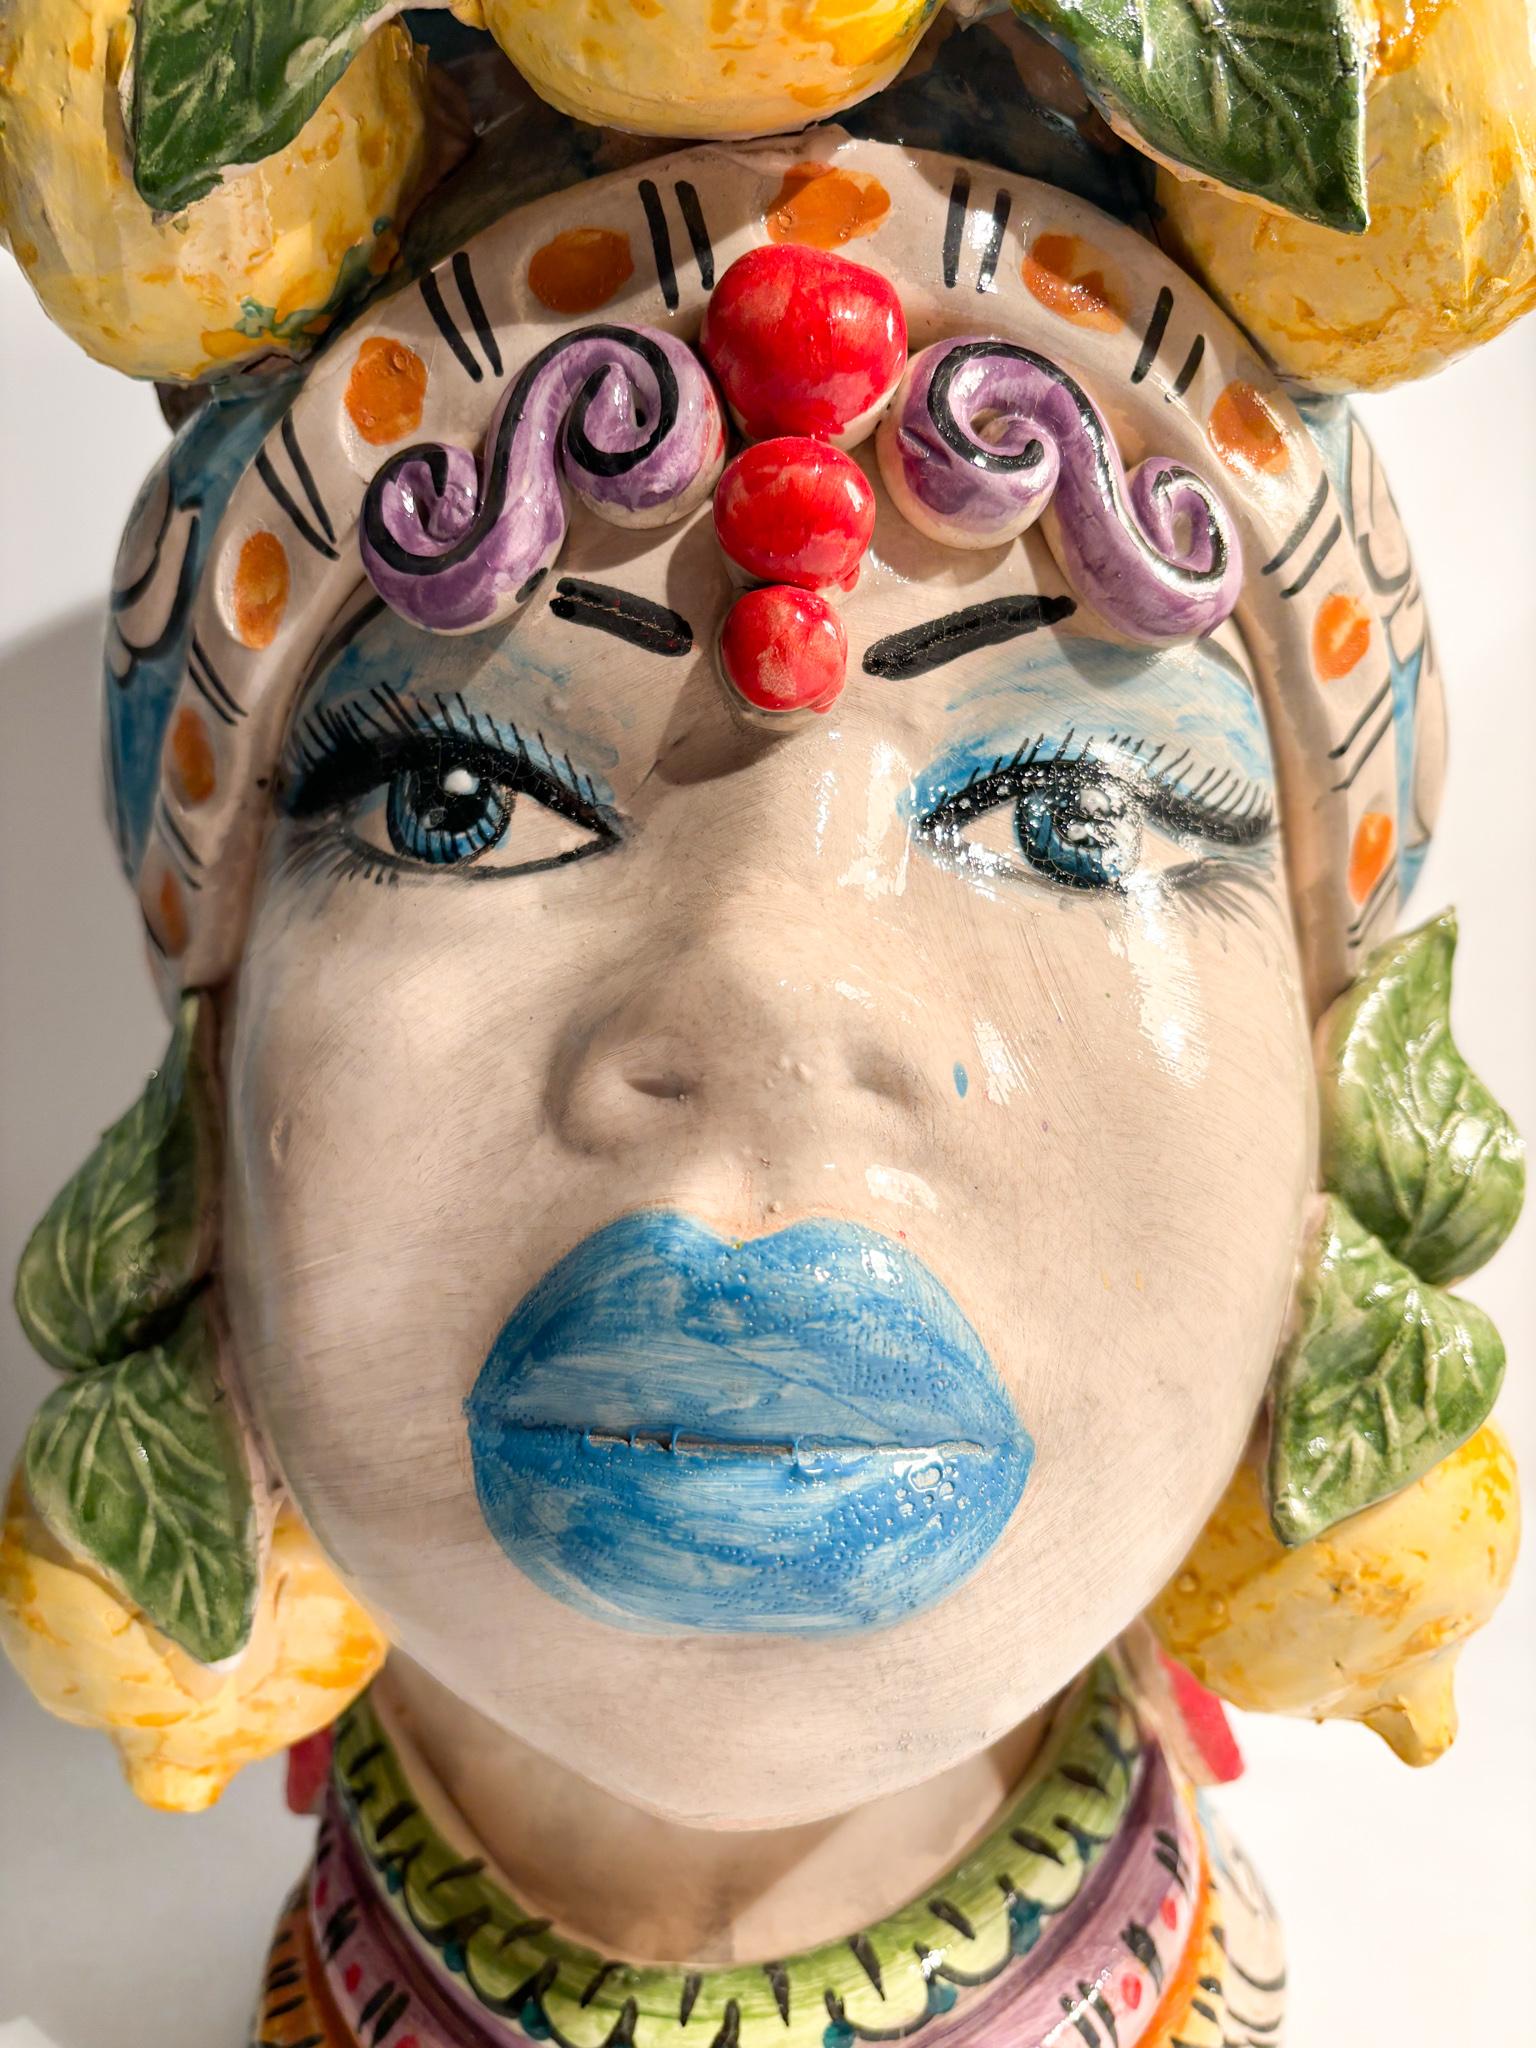 Moor's head of Caltagirone of a female figure with lemons, made by Ceramiche Germano in the 1990s

Ø 26 cm h 43 cm

Ceramiche Germano is a ceramic company based in Caltagirone, Sicily, Italy. The company was founded in 1967 by Sebastiano Germano and